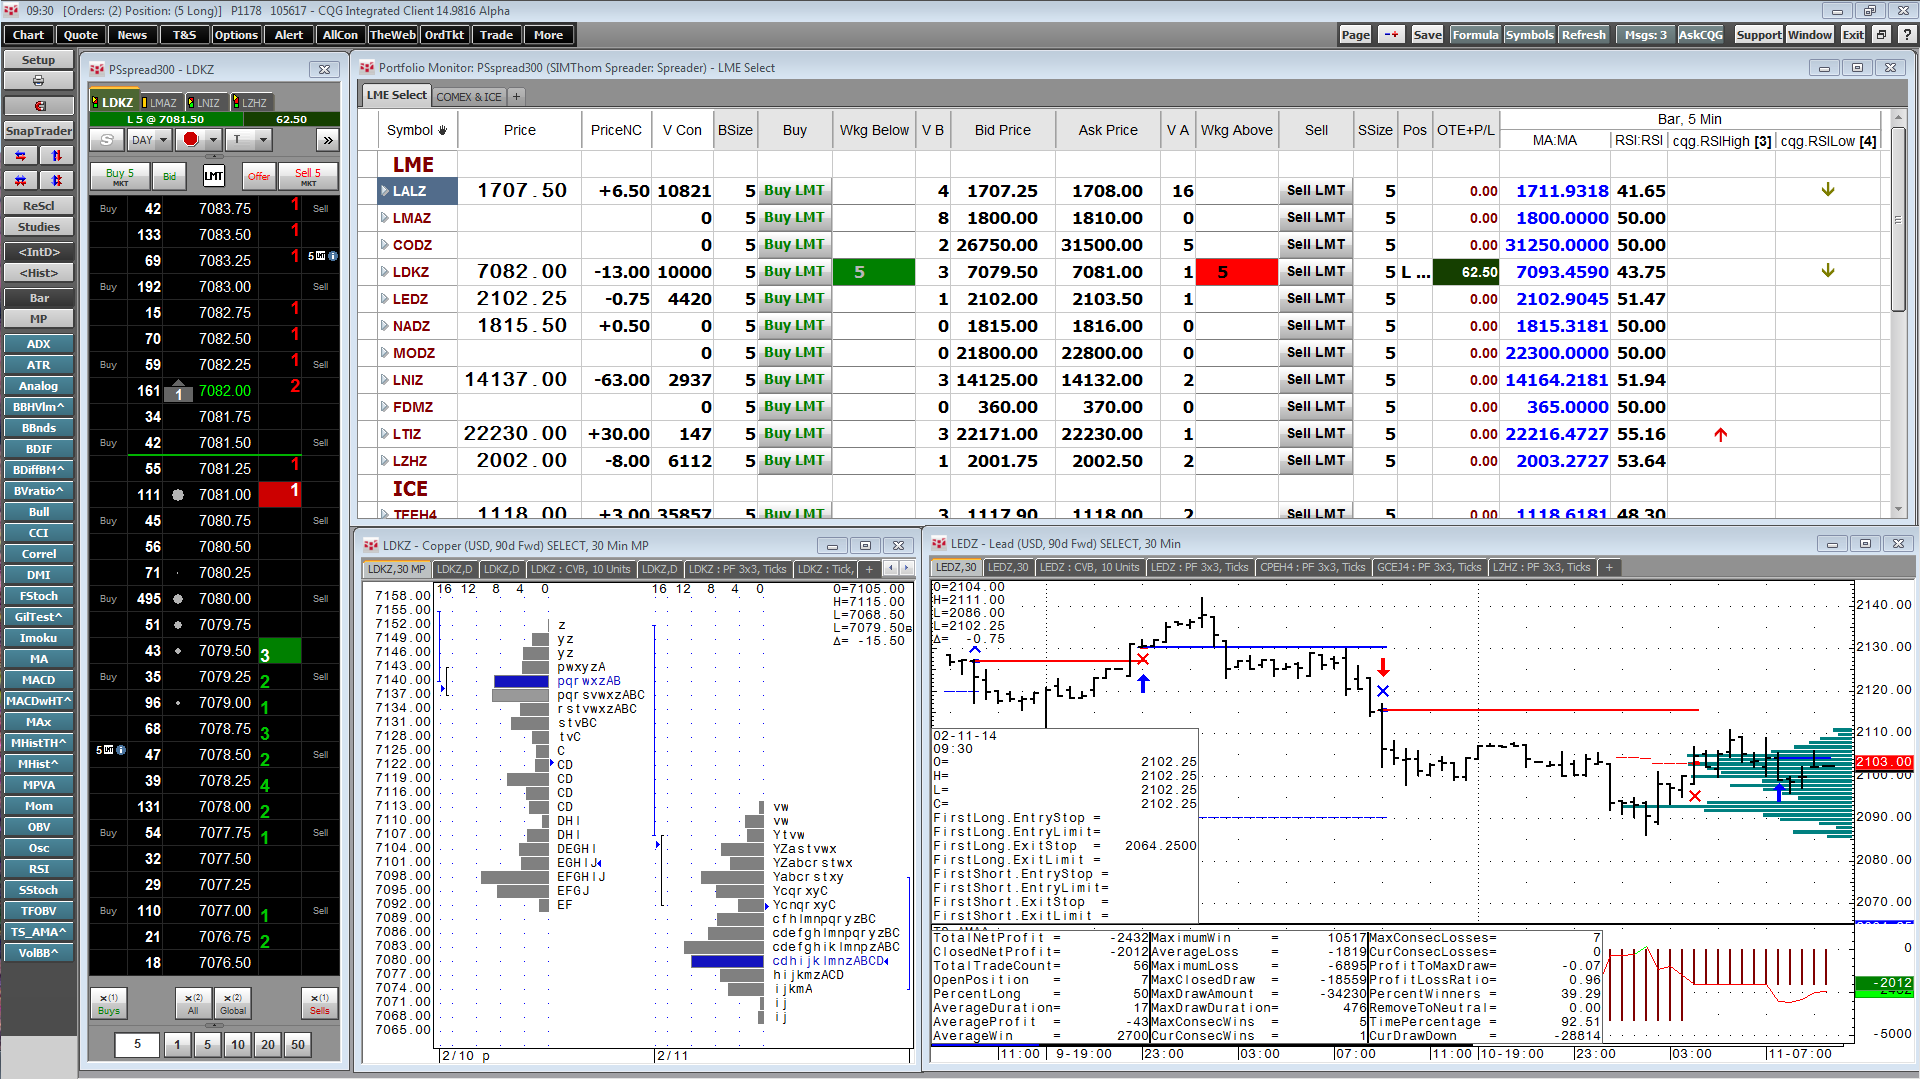 futures and options trading platform